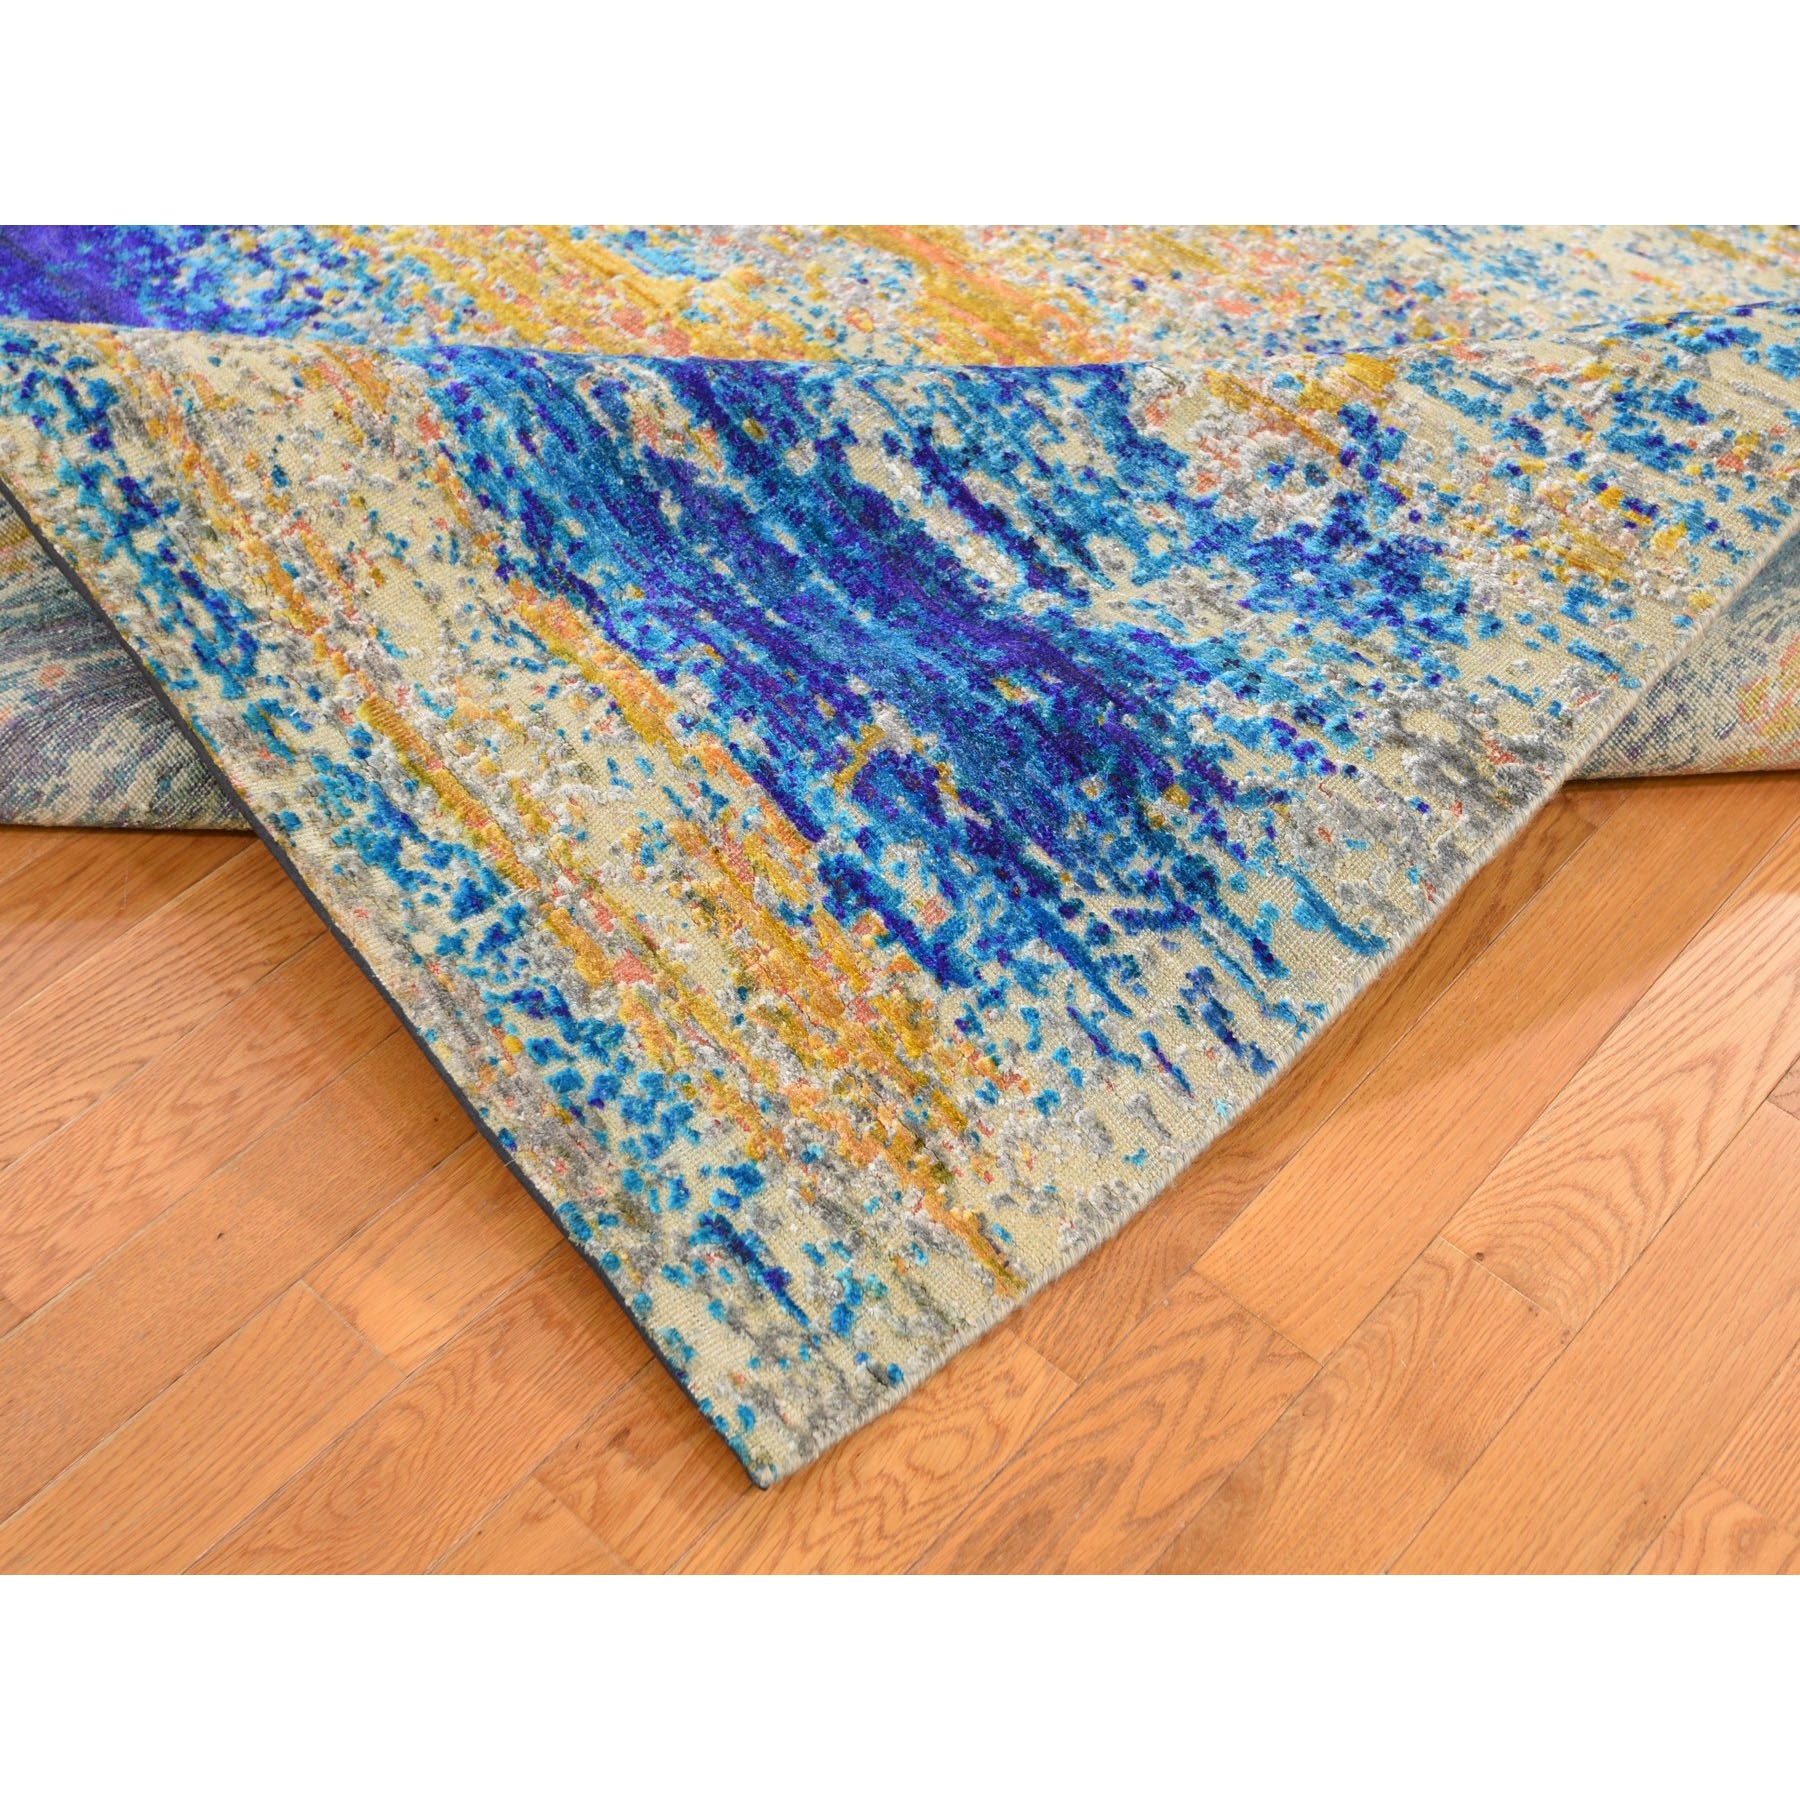 7'10"x10' Yellow Sari Silk With Textured Wool Abstract Hand Woven Oriental Rug 